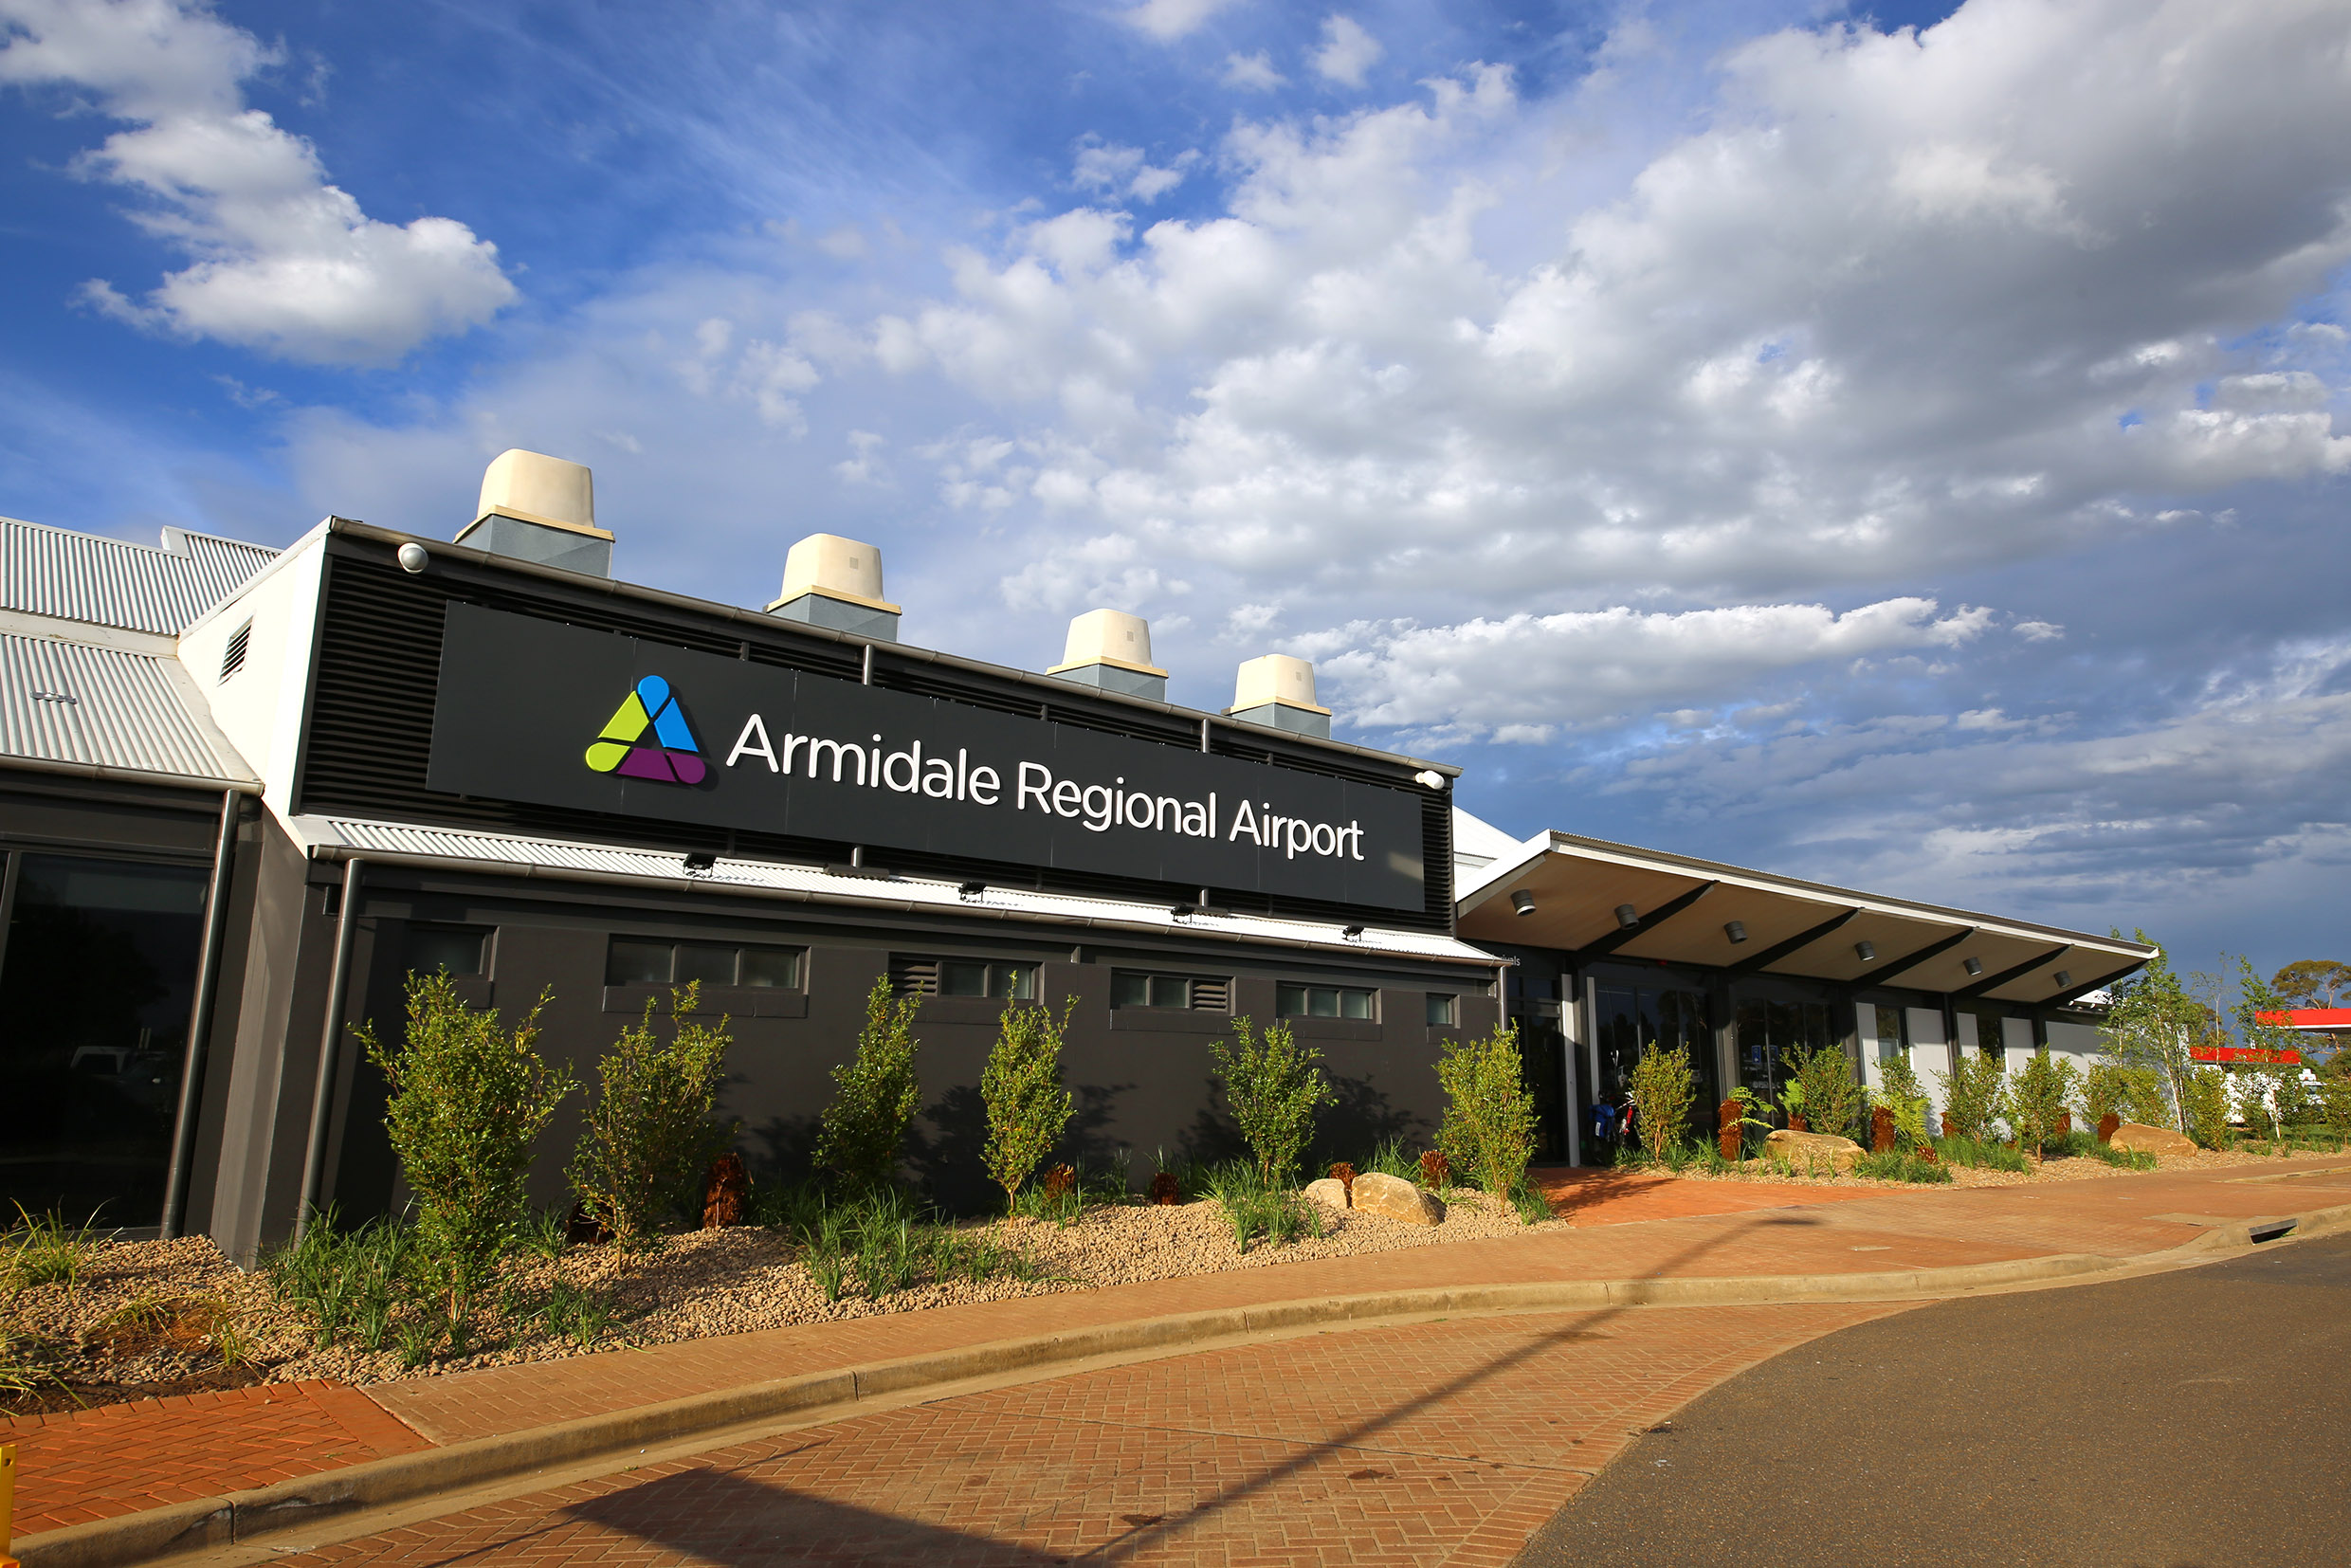 Airport terminal front view - signage